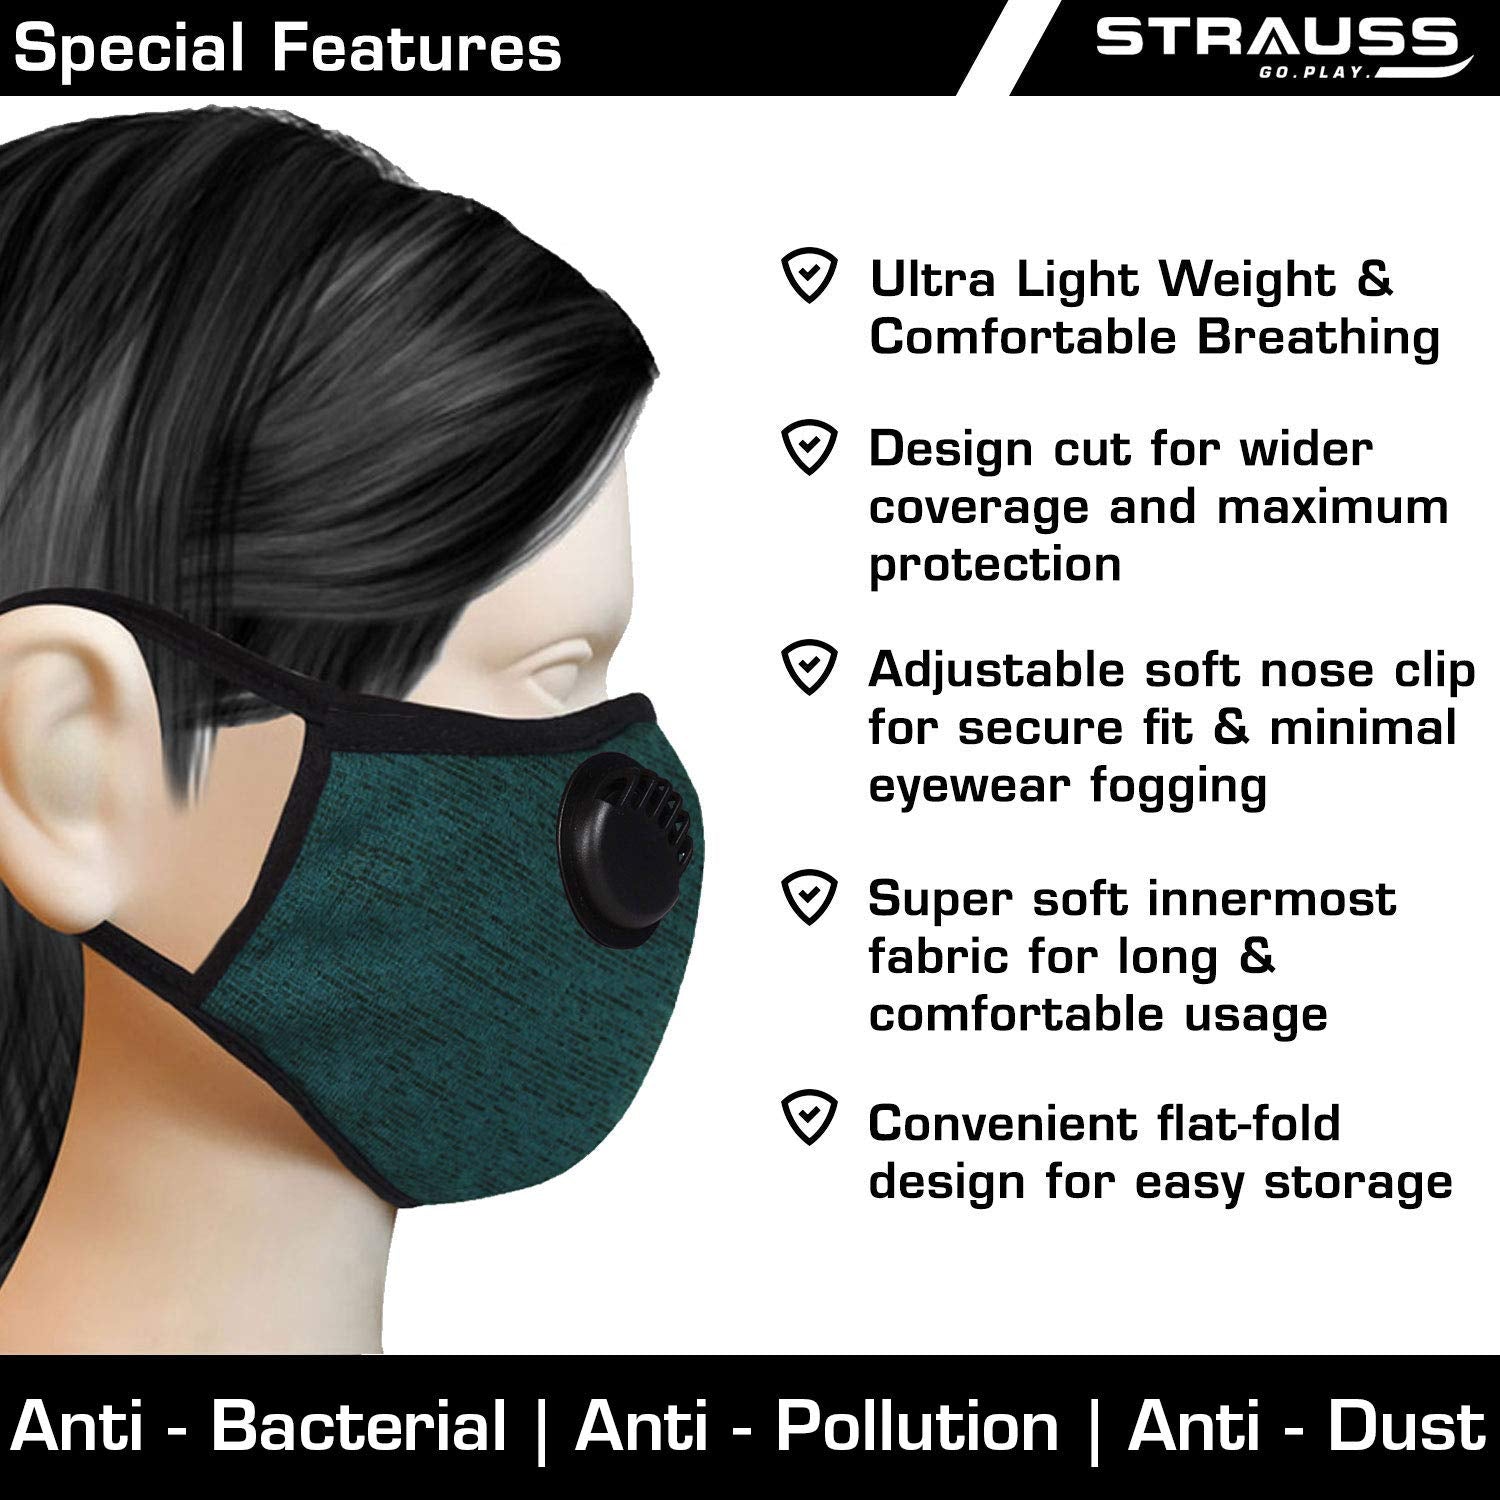 STRAUSS Unisex Anti-Bacterial Protection Mask, Non Vent, Small, (Black)